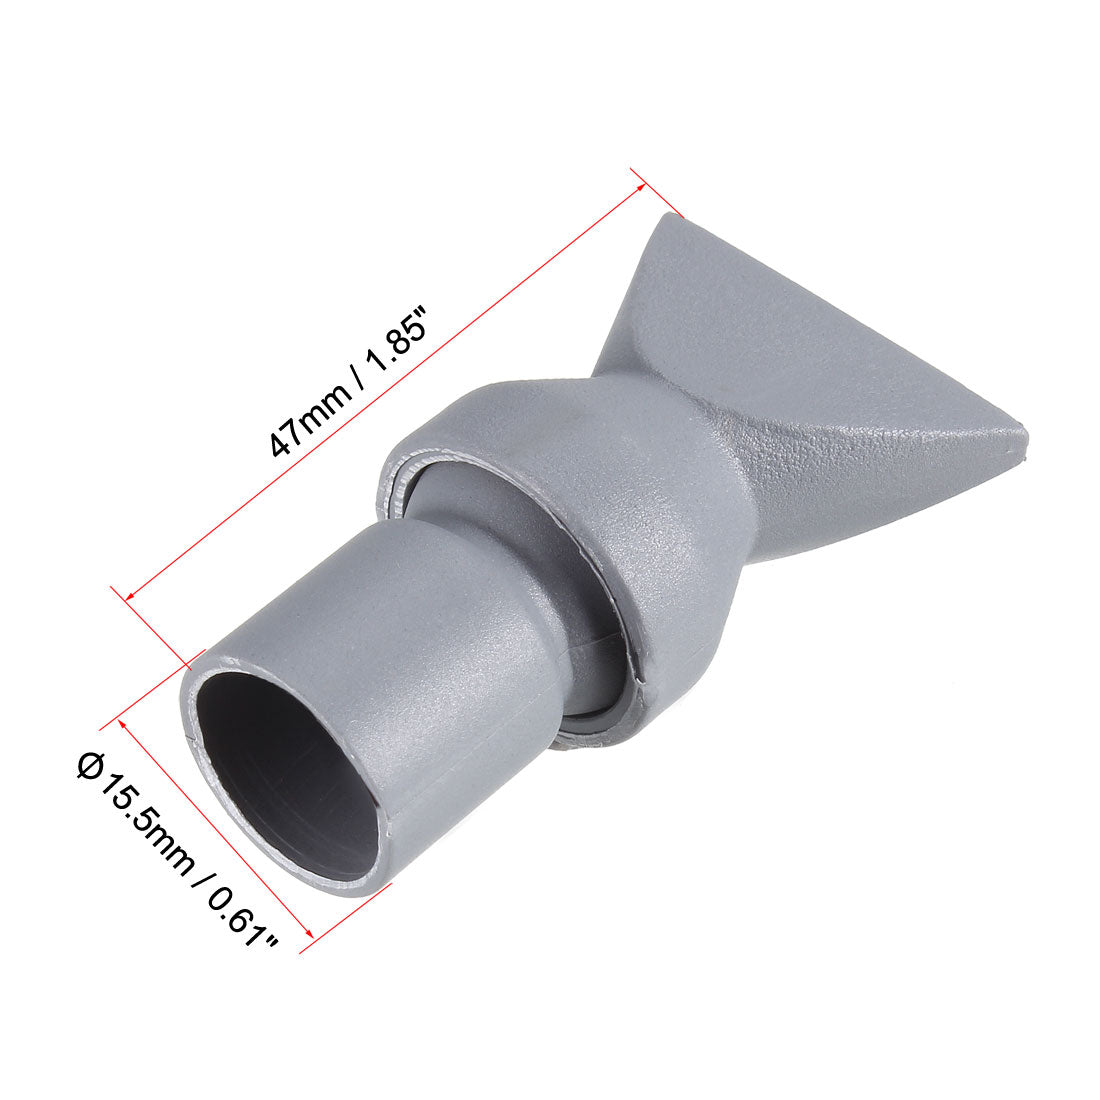 uxcell Uxcell Aquarium Nozzle Pump Nozzles Water Outlet Return Pipe Fitting Gray 15.5mmOD 2Pcs